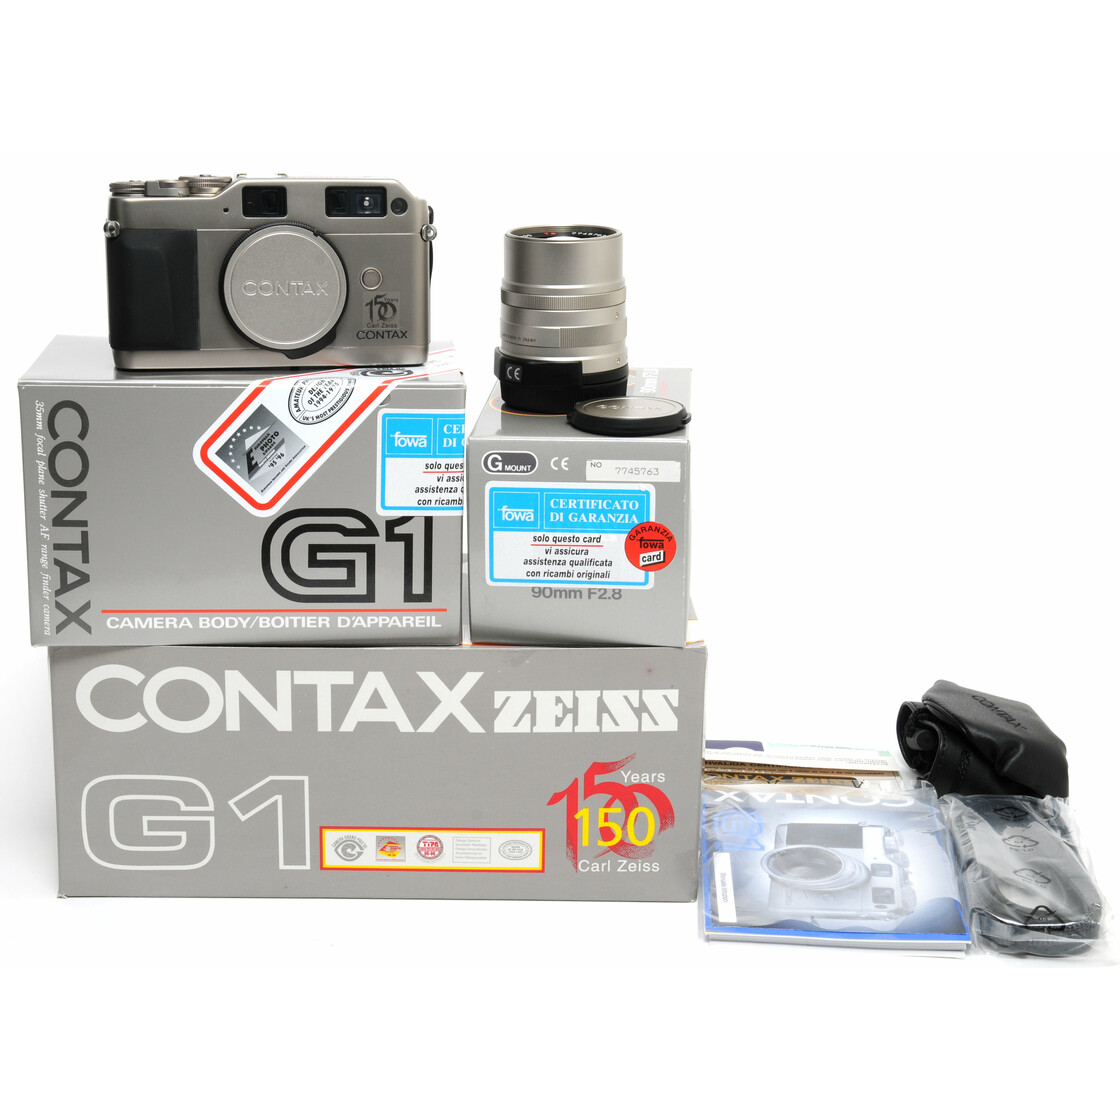 Contax G1 150 Years Carl Zeiss Edition NEW boxed w. Sonnar 2.8